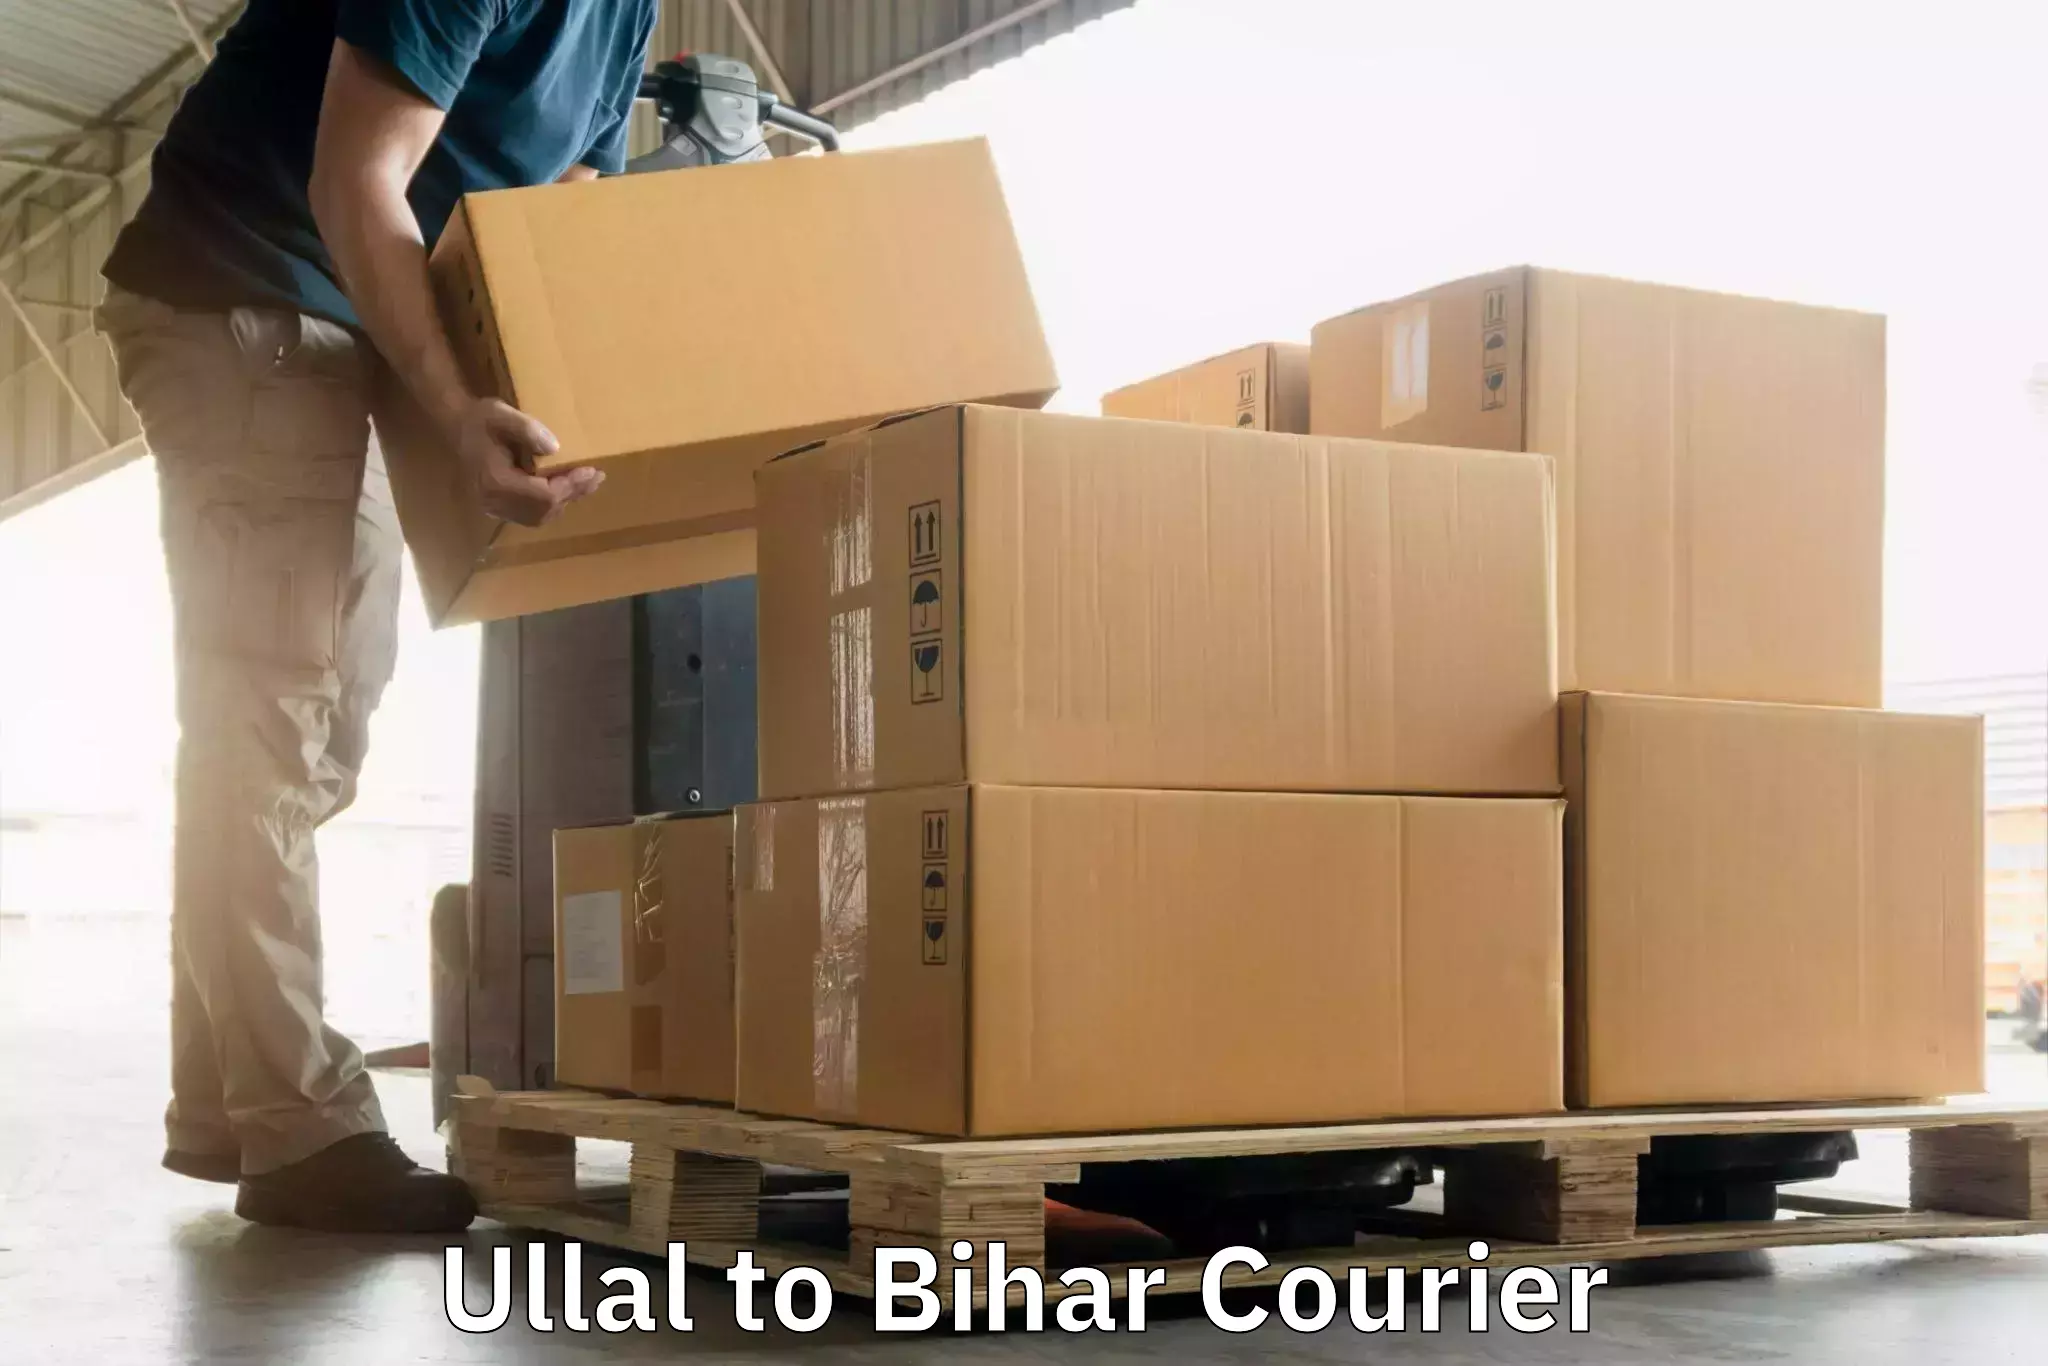 Dynamic courier operations Ullal to Dhaka